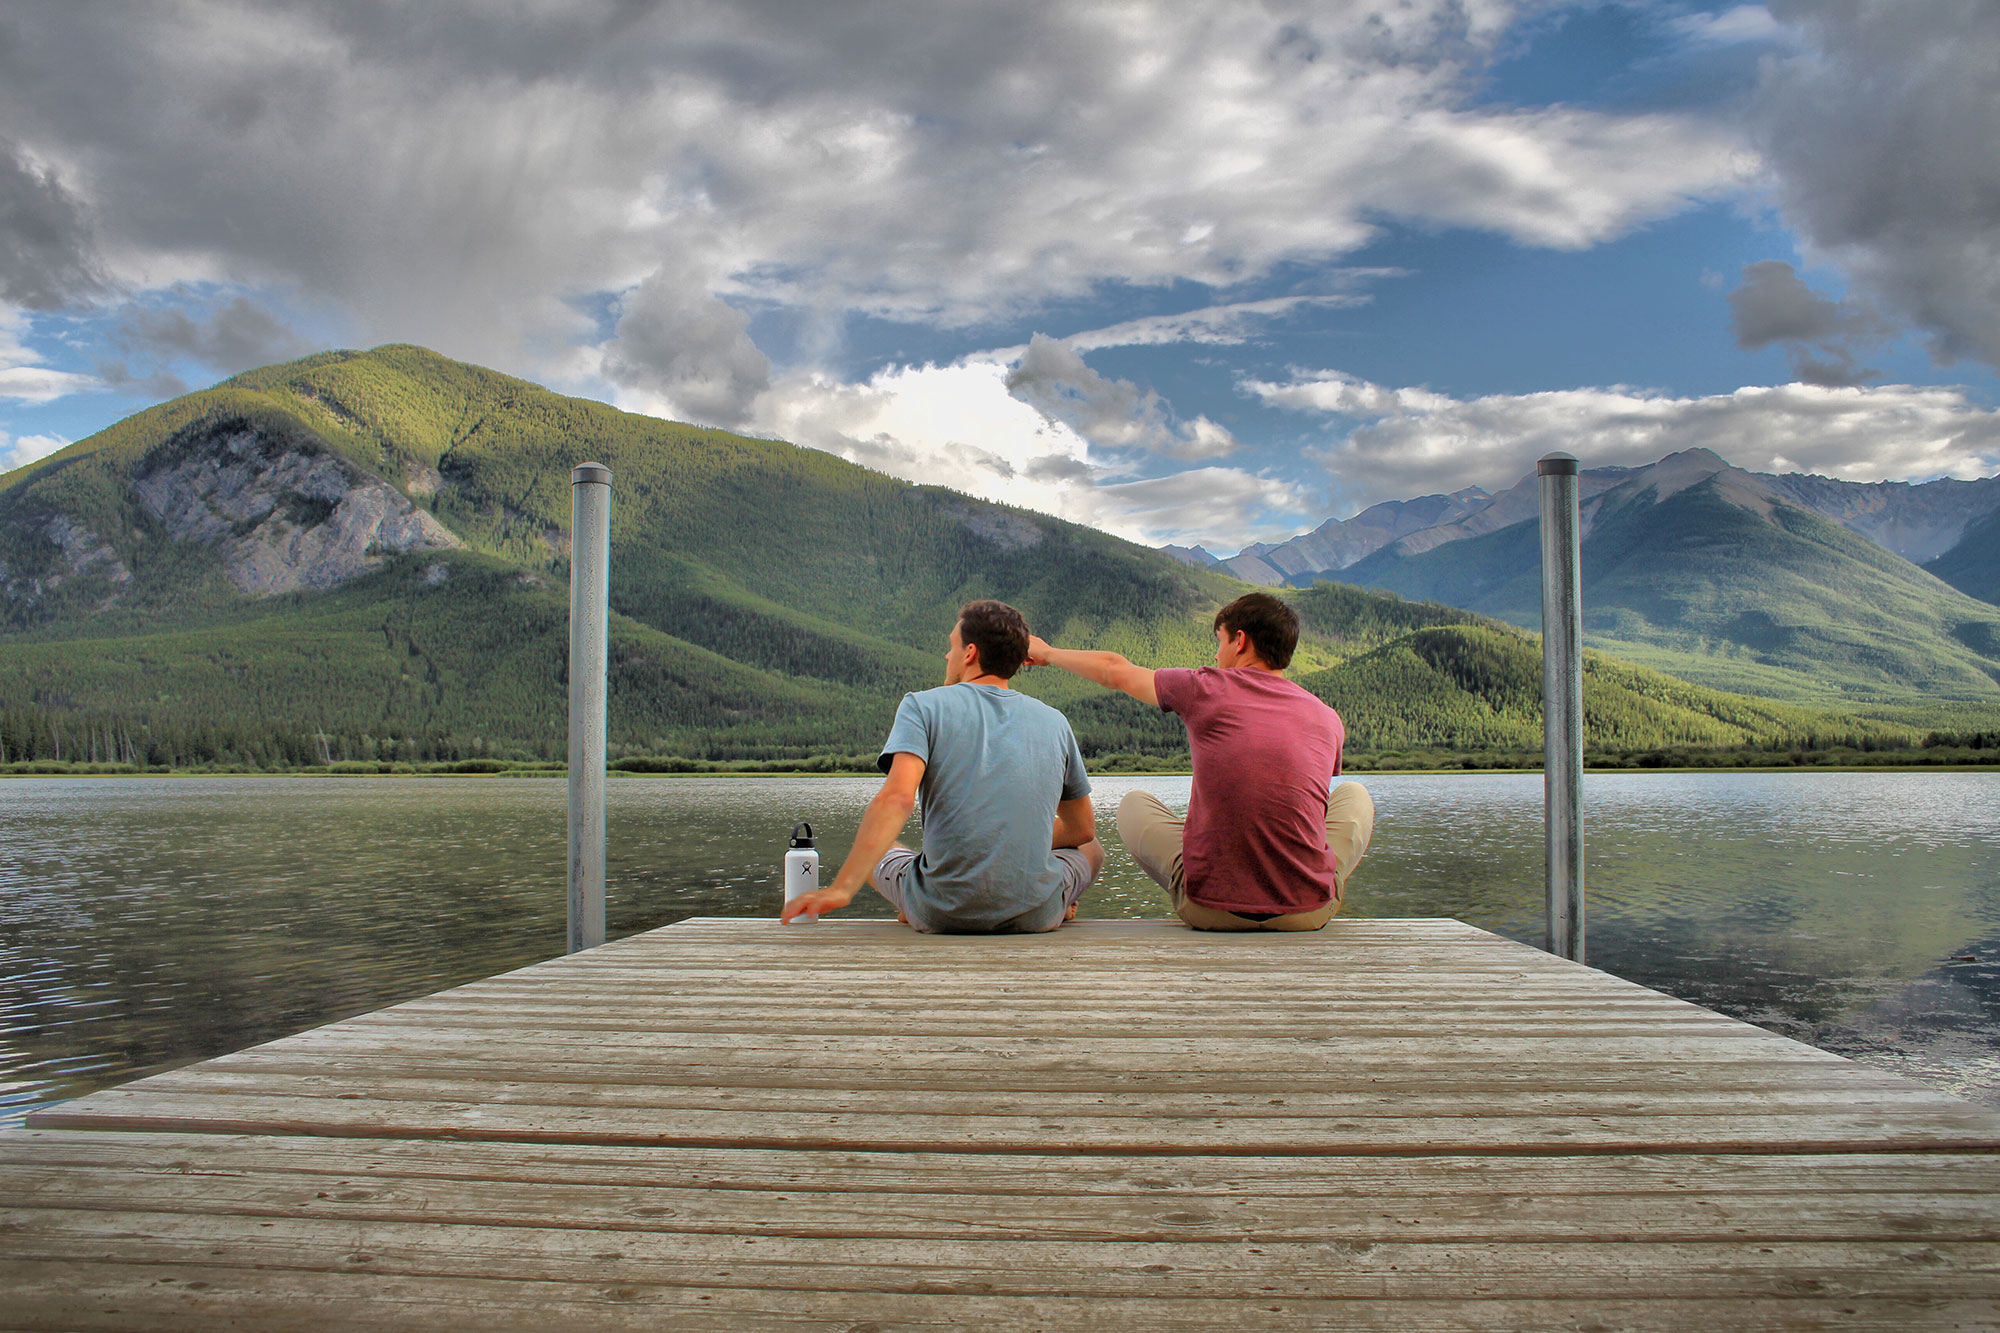 Vermillion Lake is one of the top things to do in Banff all year round